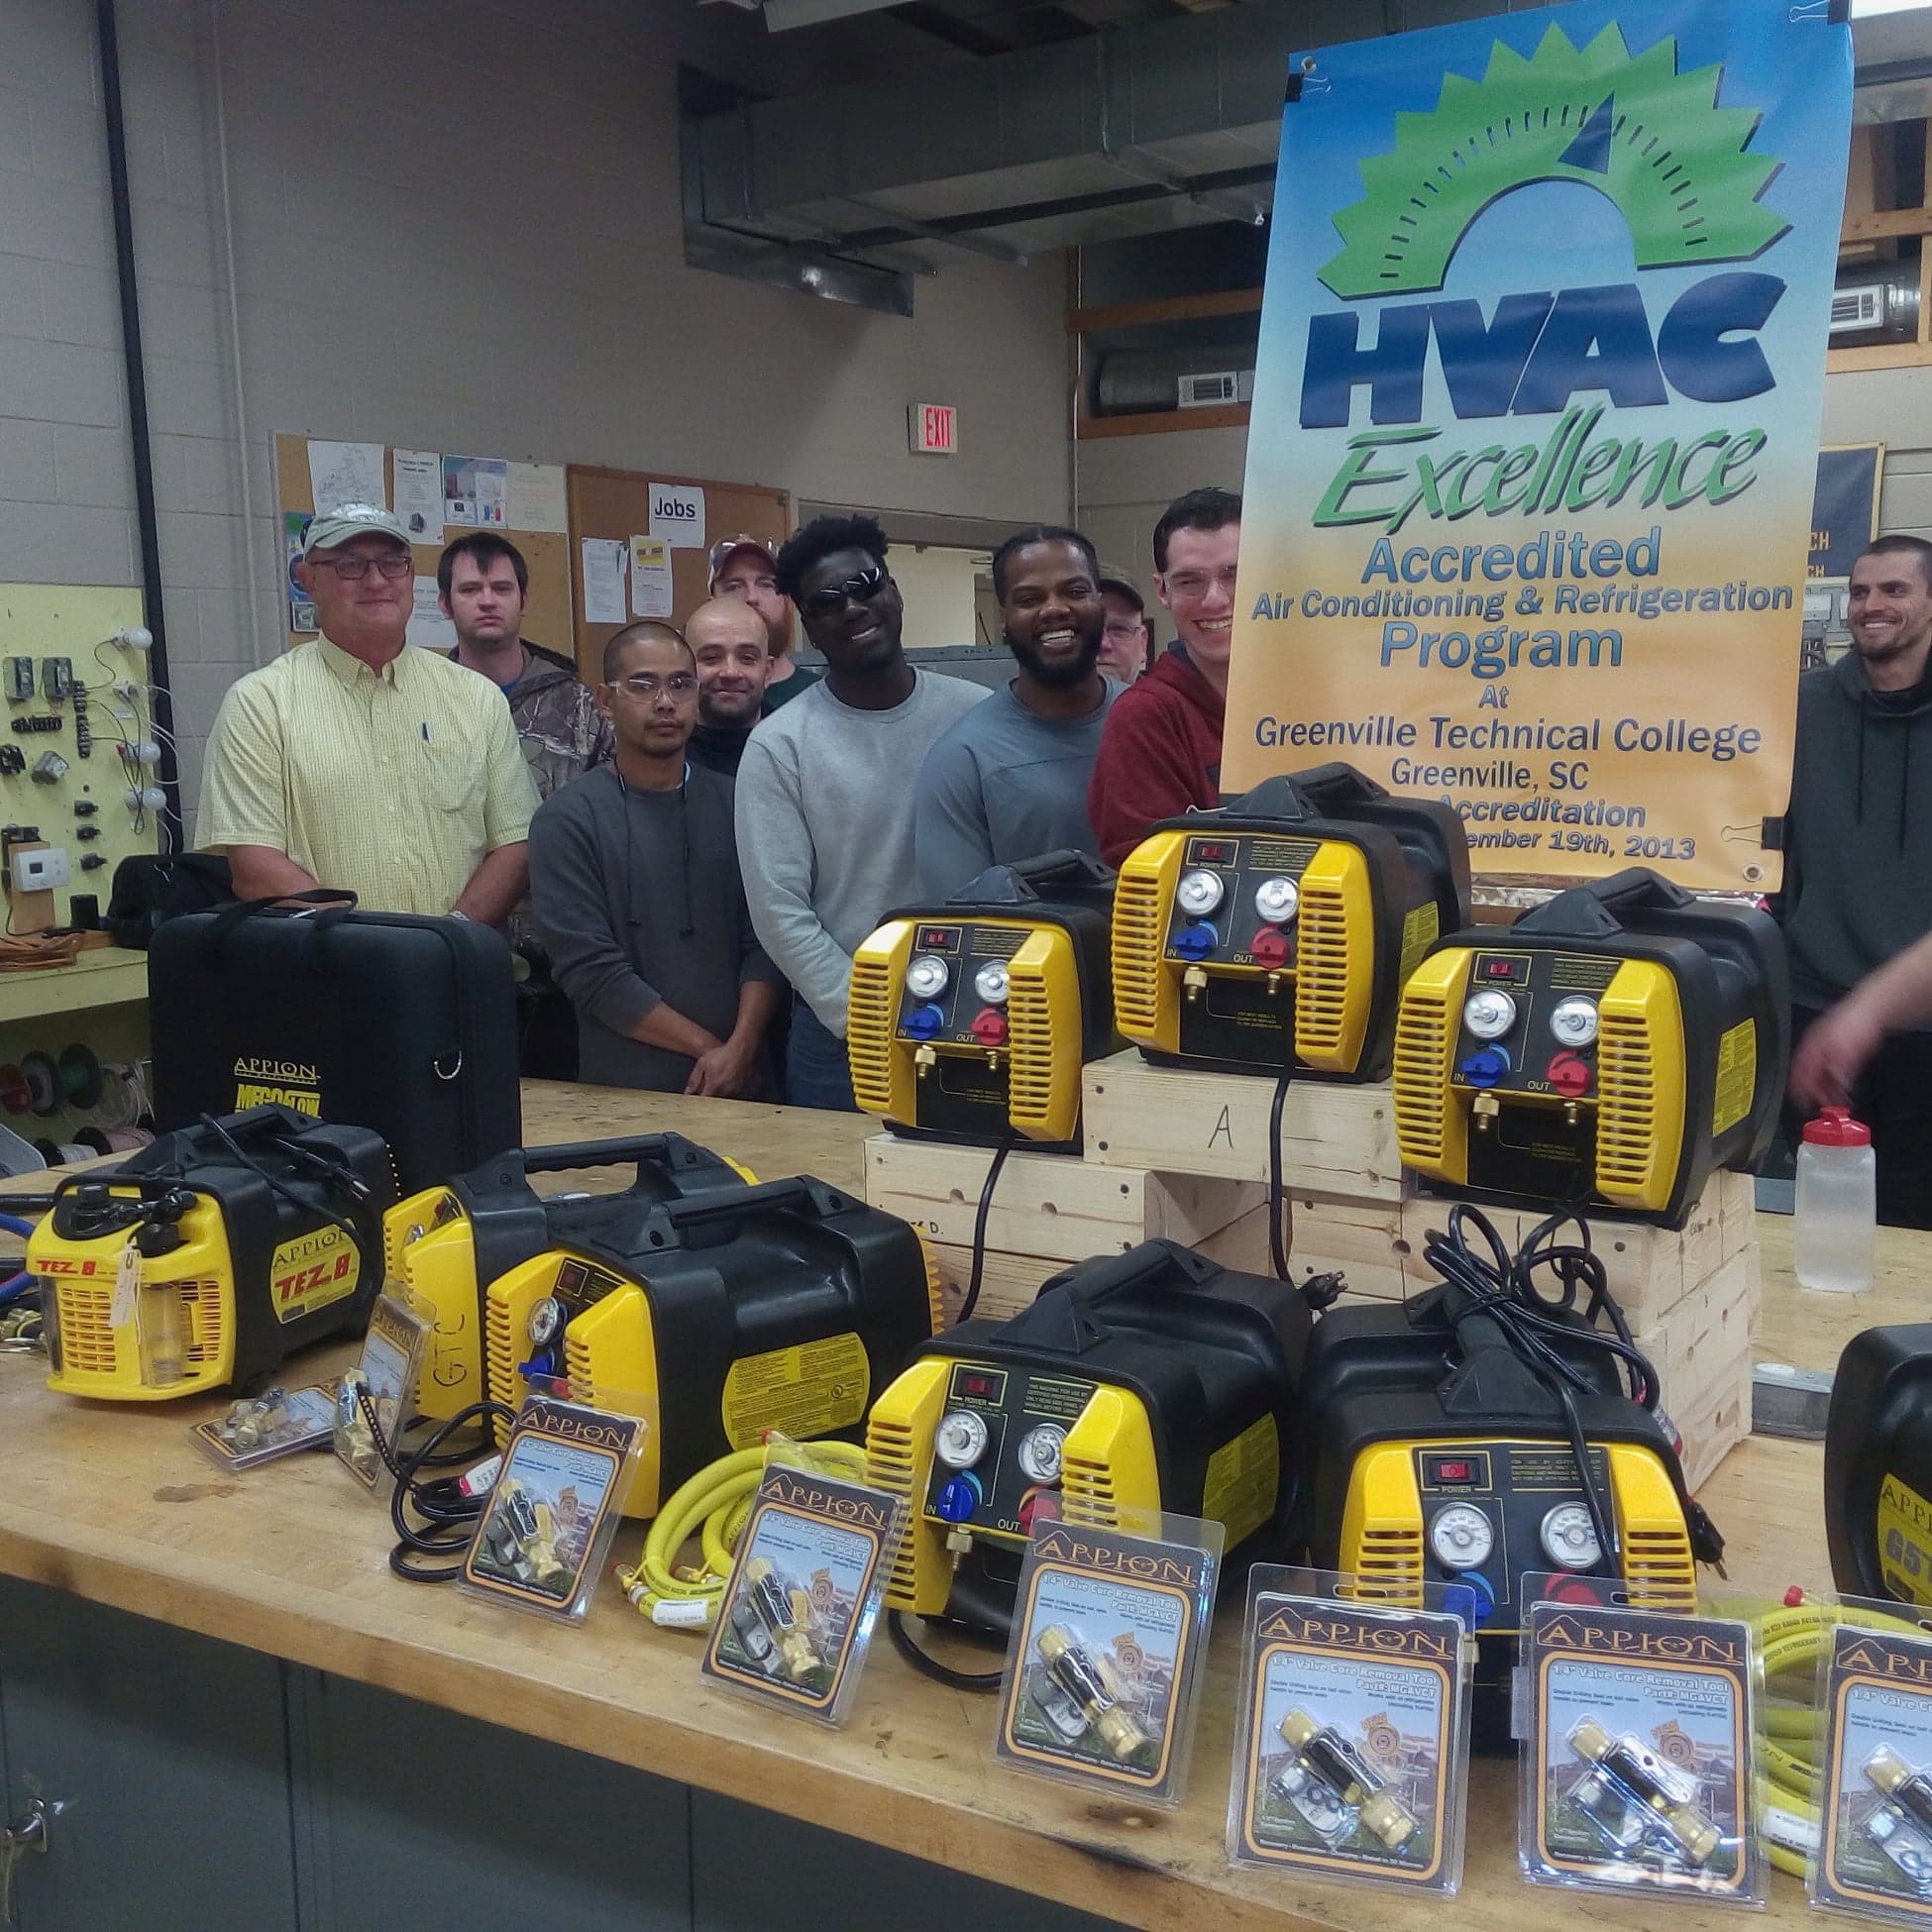 HVACR Appion equipment with students